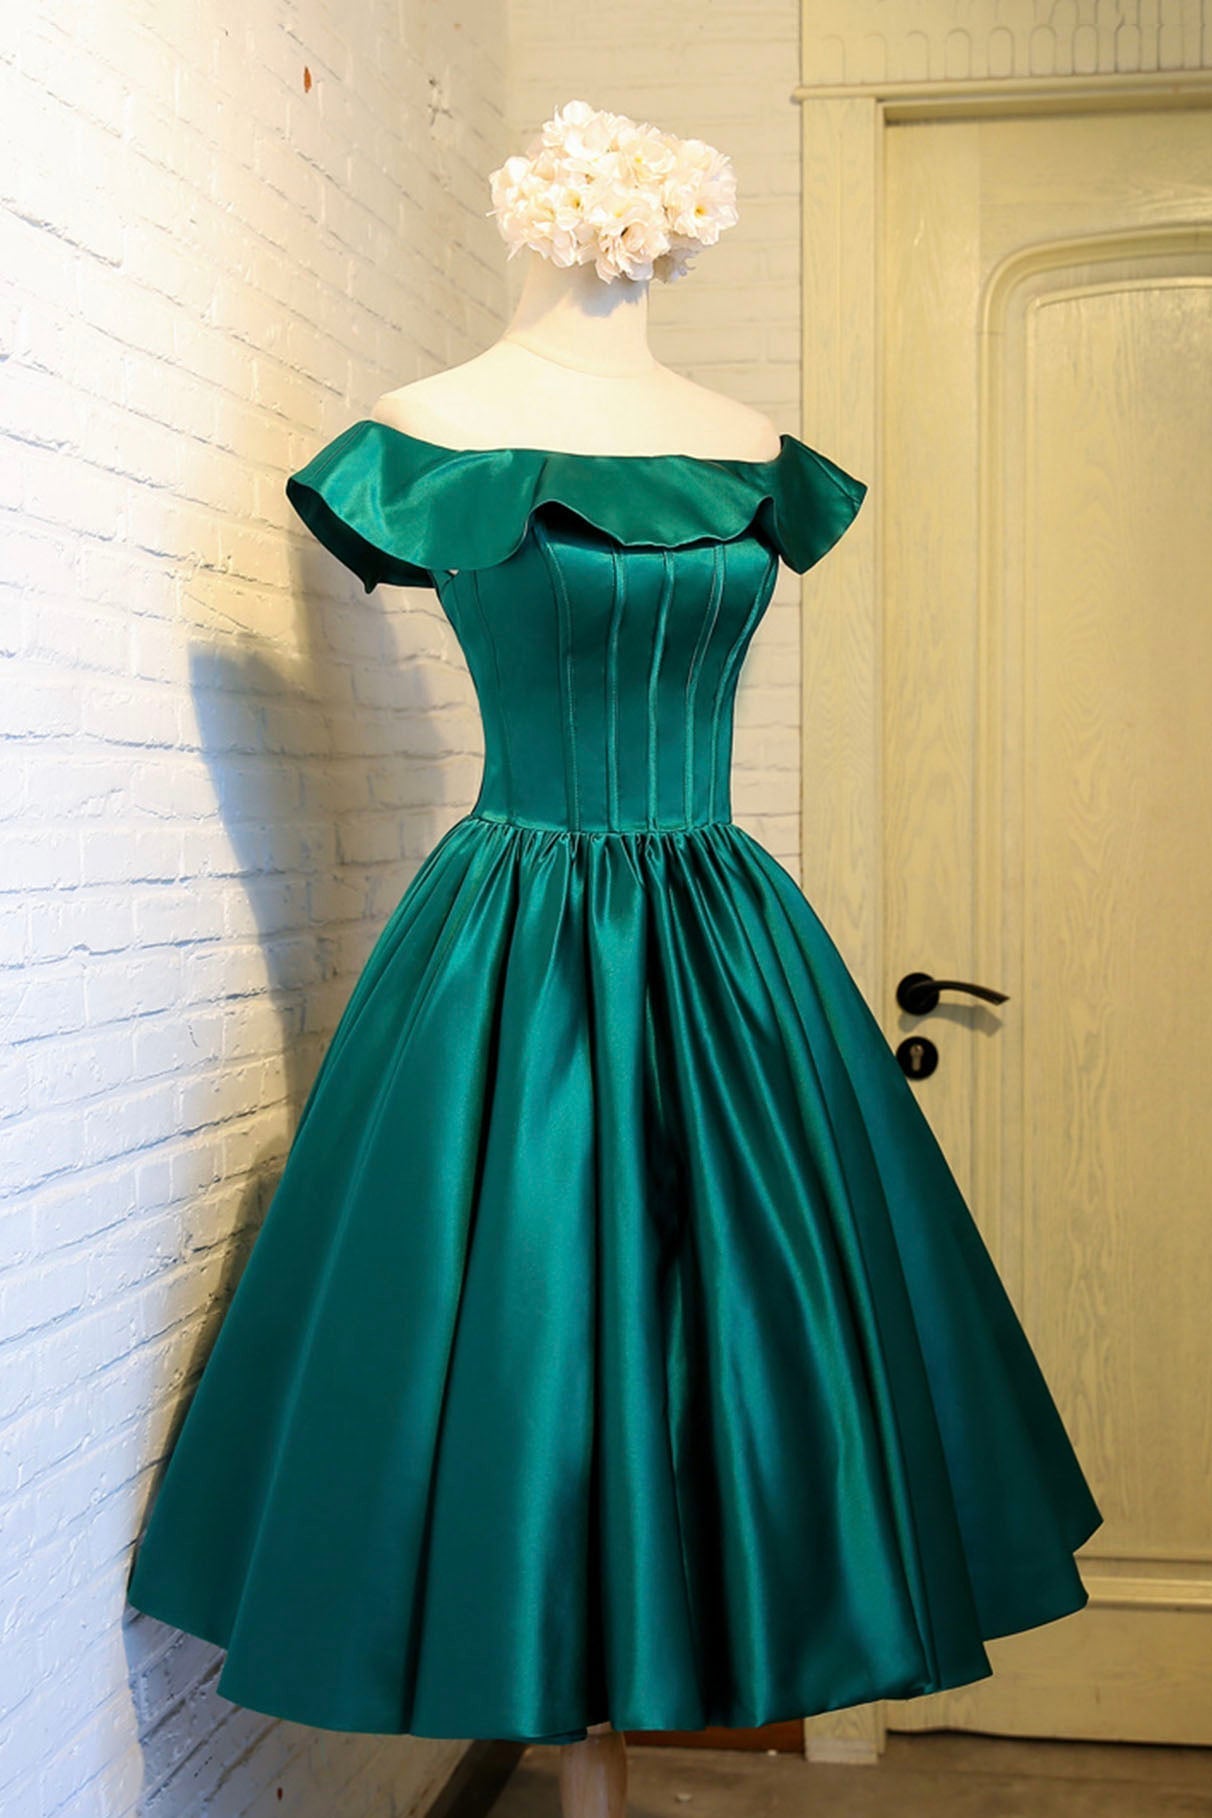 Formal Dresses Style, Green Satin Short Homecoming Dress, Cute Off the Shoulder Knee Length Prom Dress